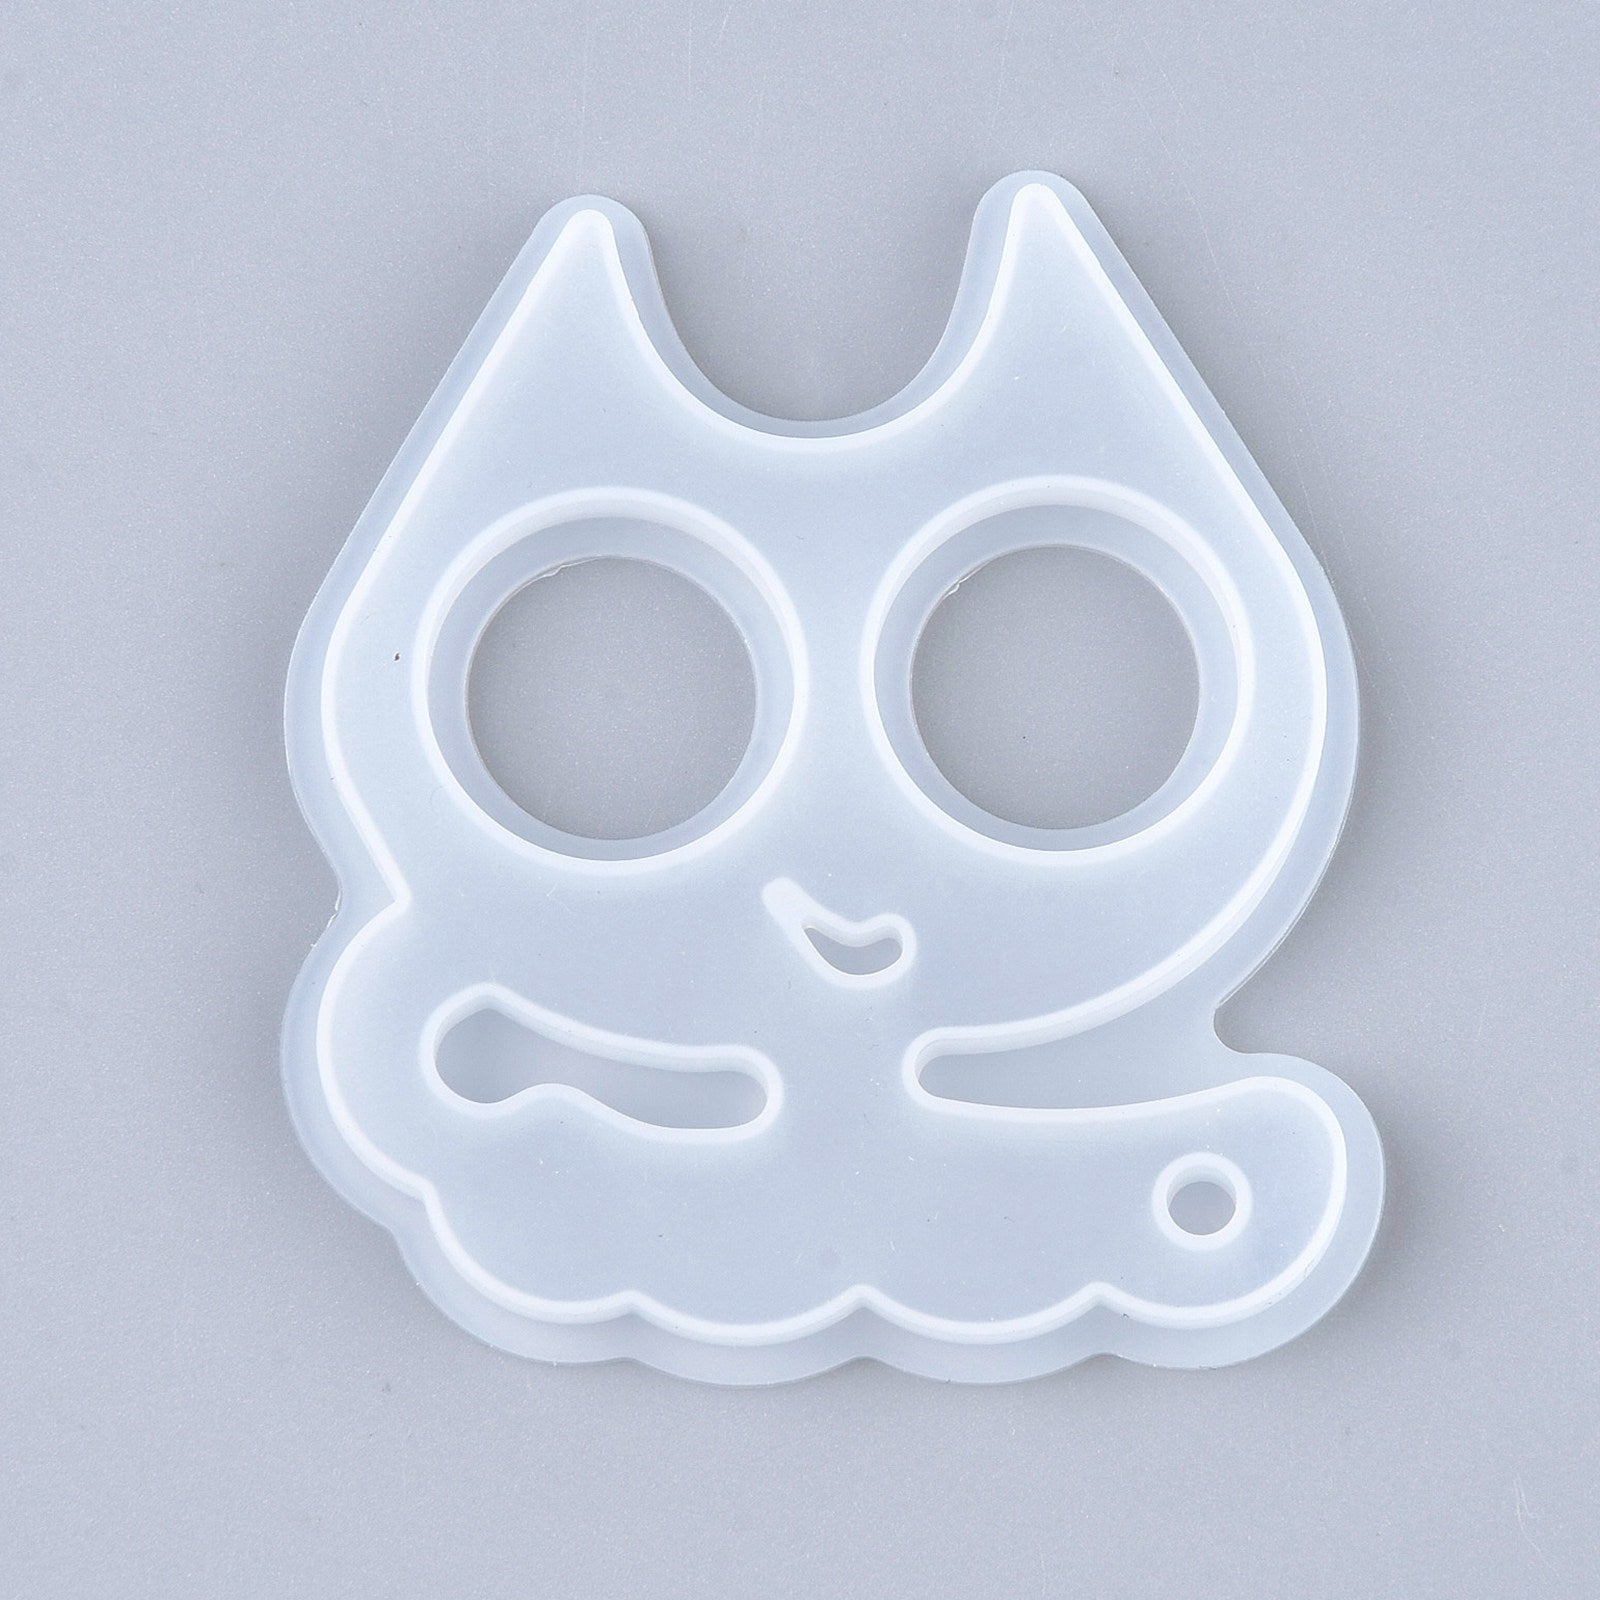 Kitty Shaker Clutch Bag Silicone Mold Kit